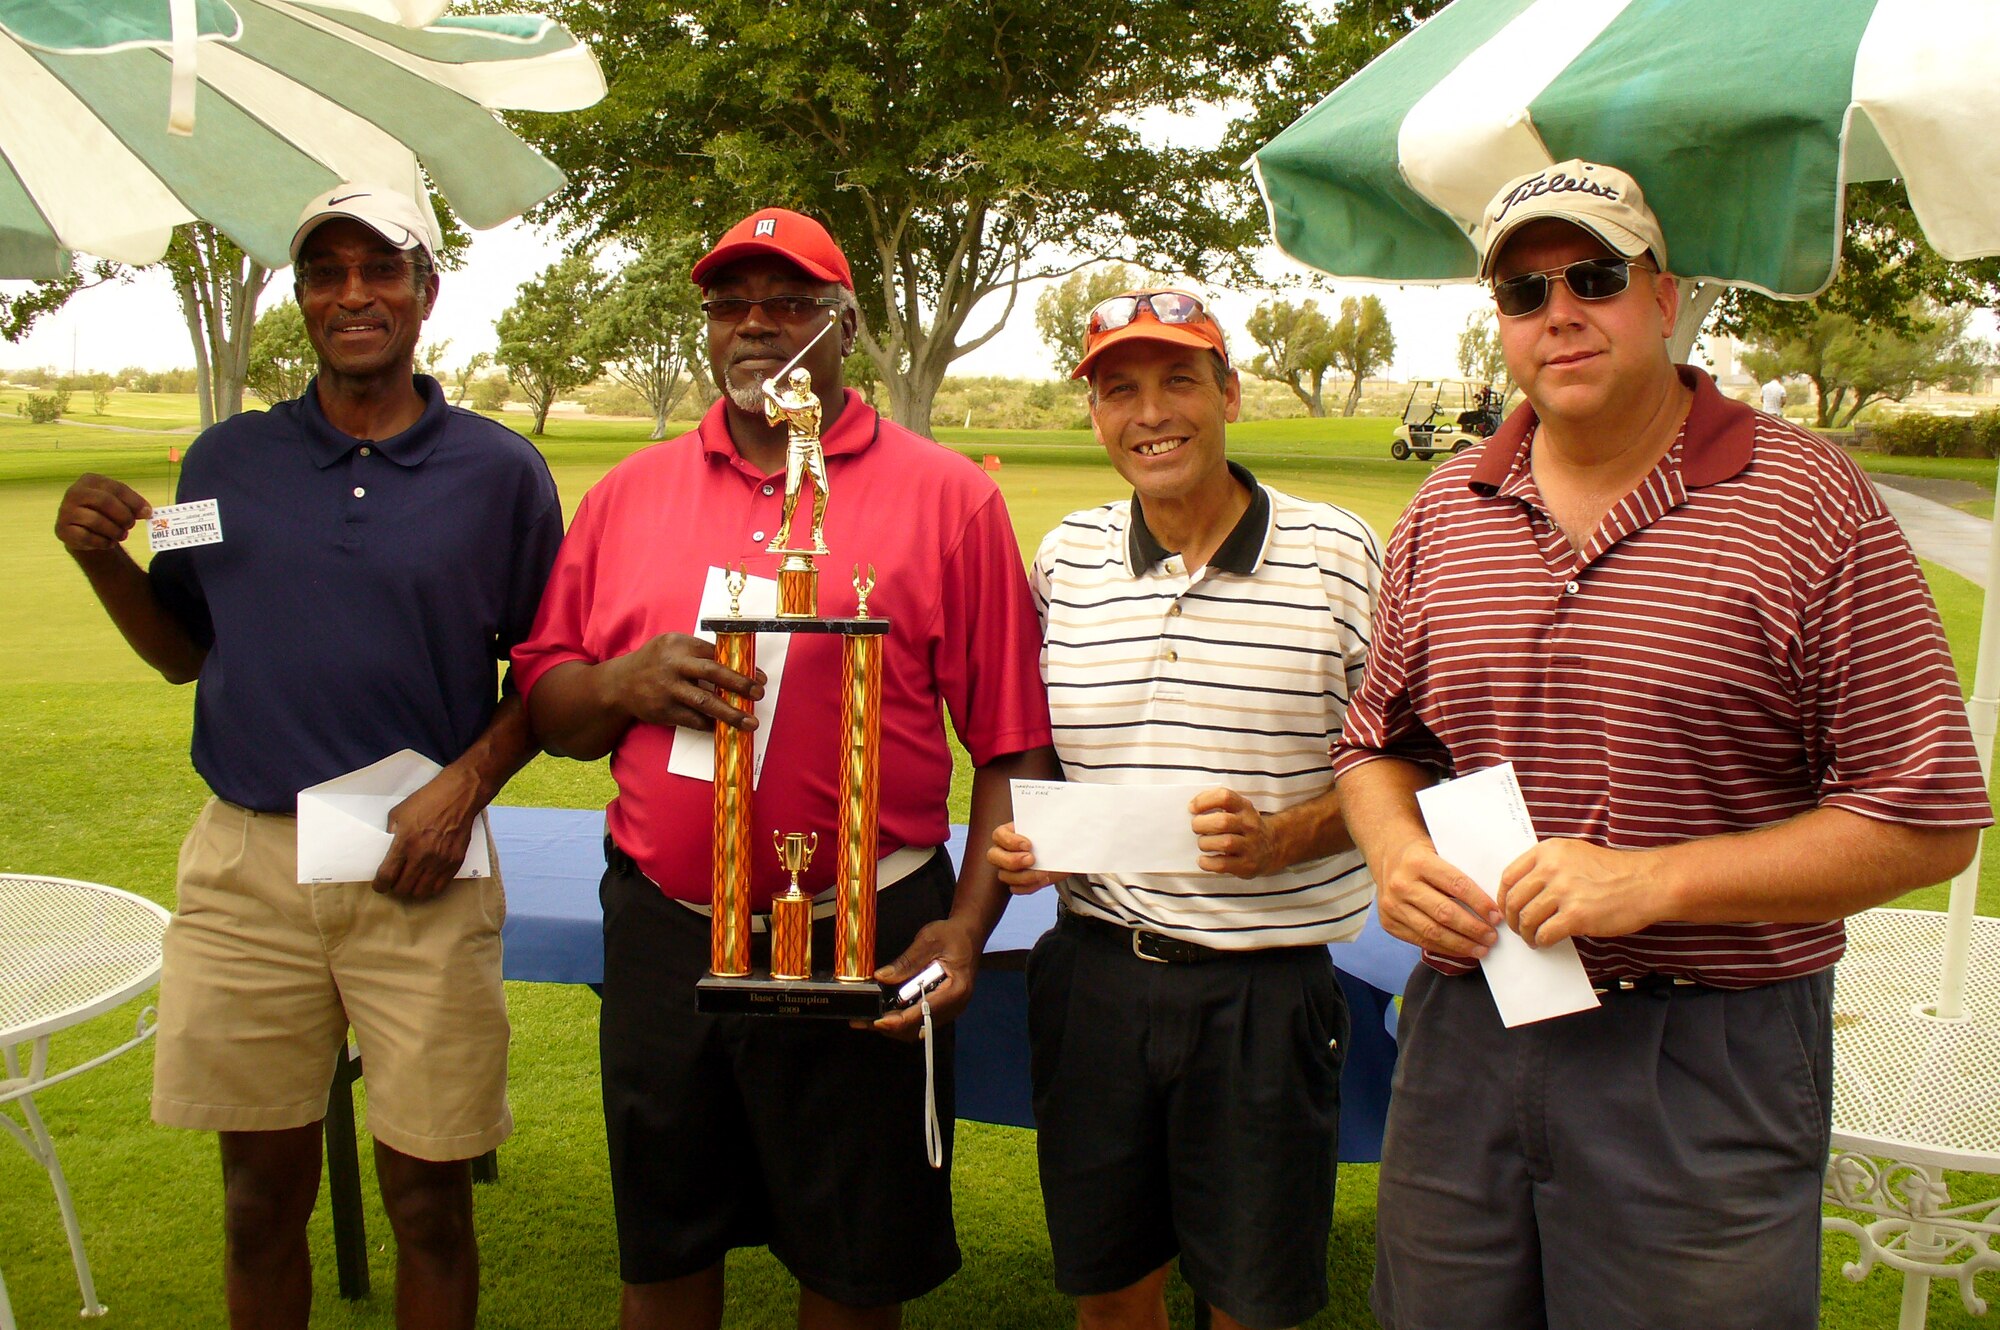 HOLLOMAN AIR FORCE BASE, N.M. -- The four individuals who placed in the top four in the 2009 base golf championship pose for a photo after the tournament at the Apache Mesa Golf Course here Aug. 23. The individuals (from left to right) are George Morris, who placed third overall, Tommie Williams, first overall, Ralph Aegan, second, and John Gibson, fourth. (Photo provided by Patrick Mahoney, Director of Golf, Apache Mesa Golf Course)